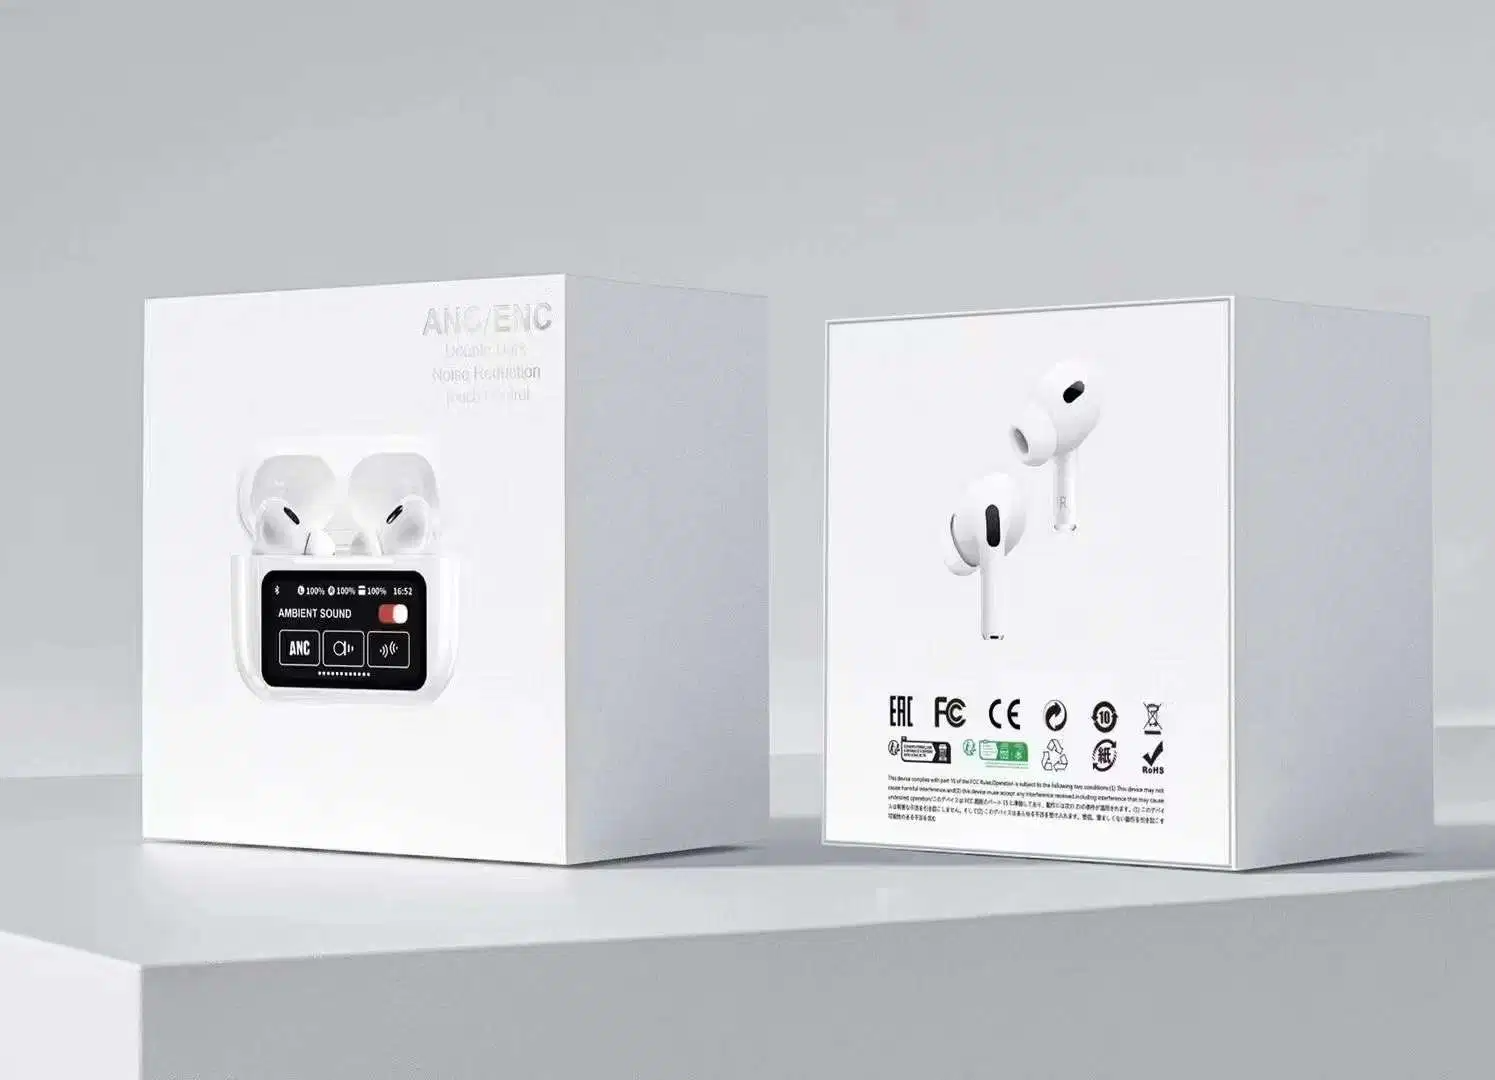 A9 Pro ANC Earbuds Touch Screen Display